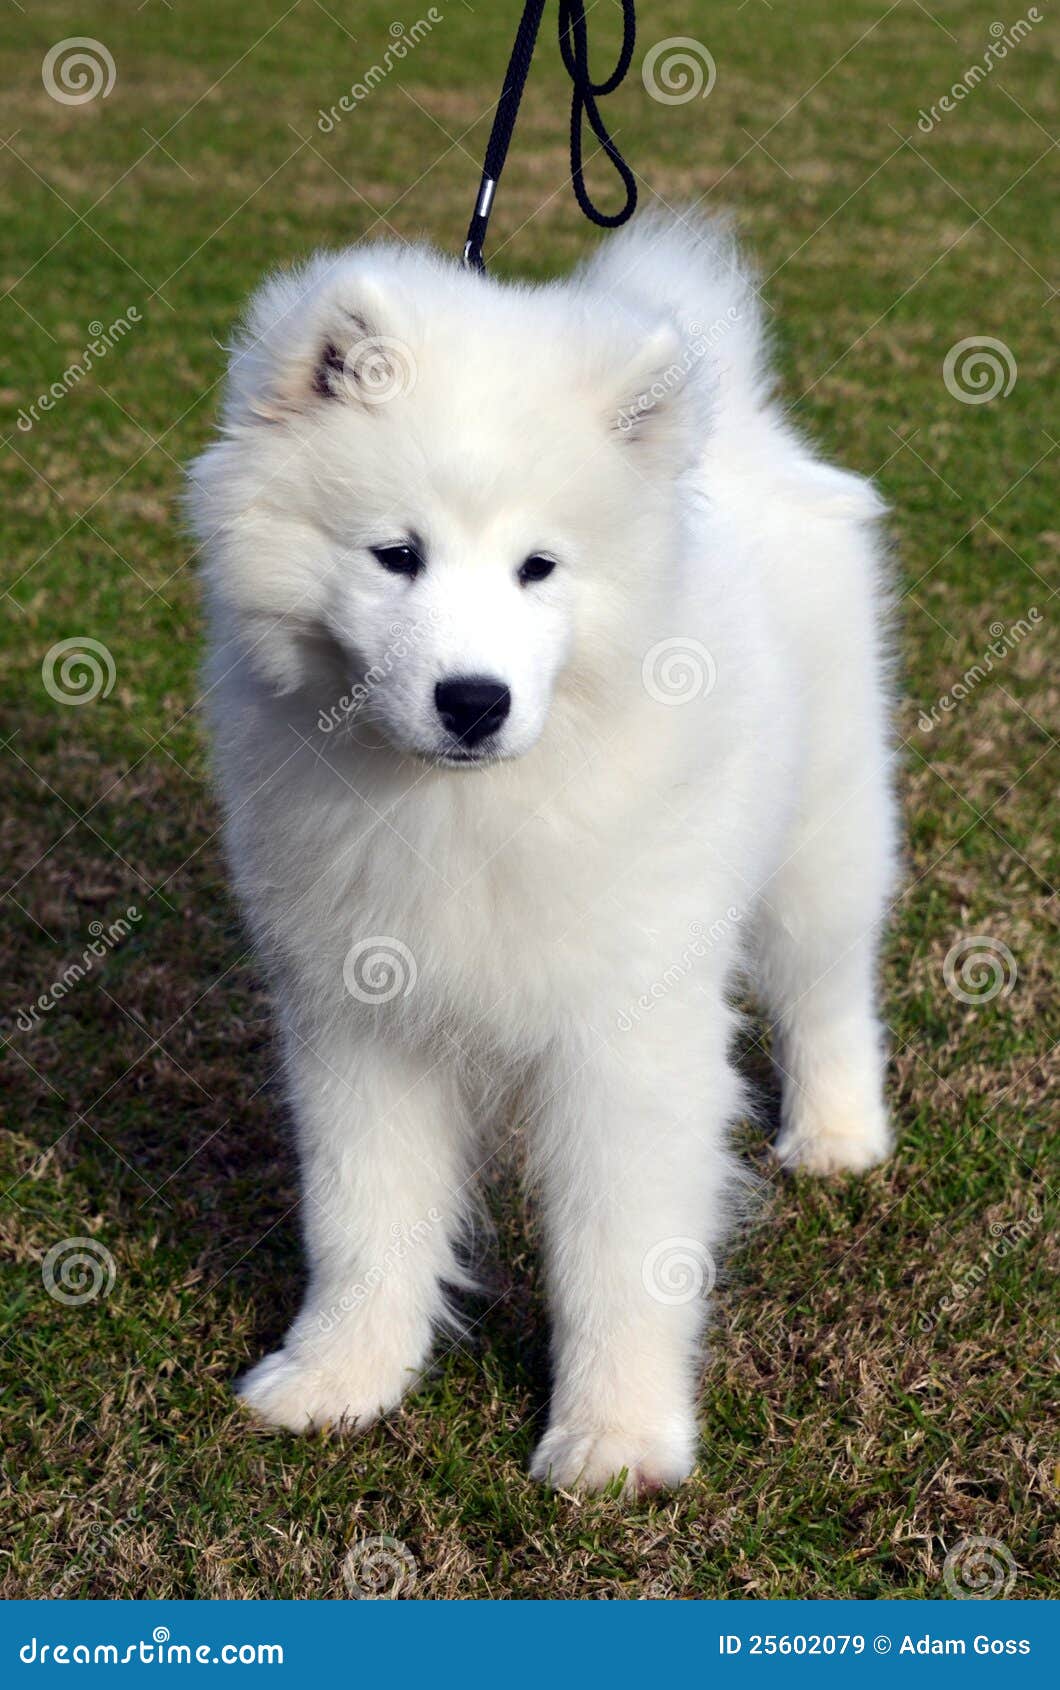 What are some traits of miniature Samoyed puppies?